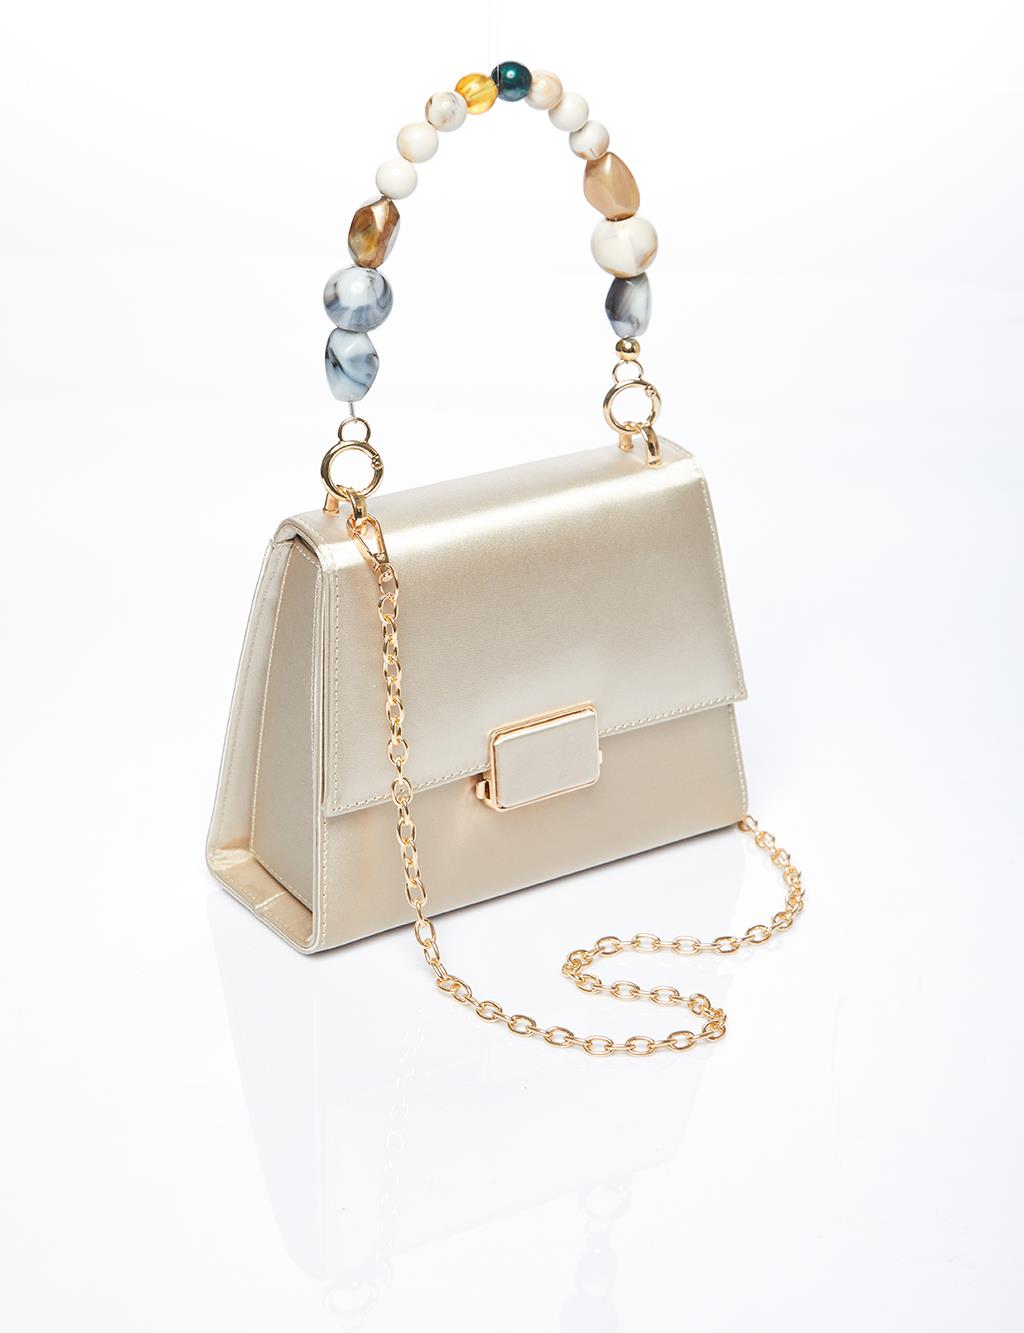 Beaded Cover Satin Bag Cream with Metal Accessories